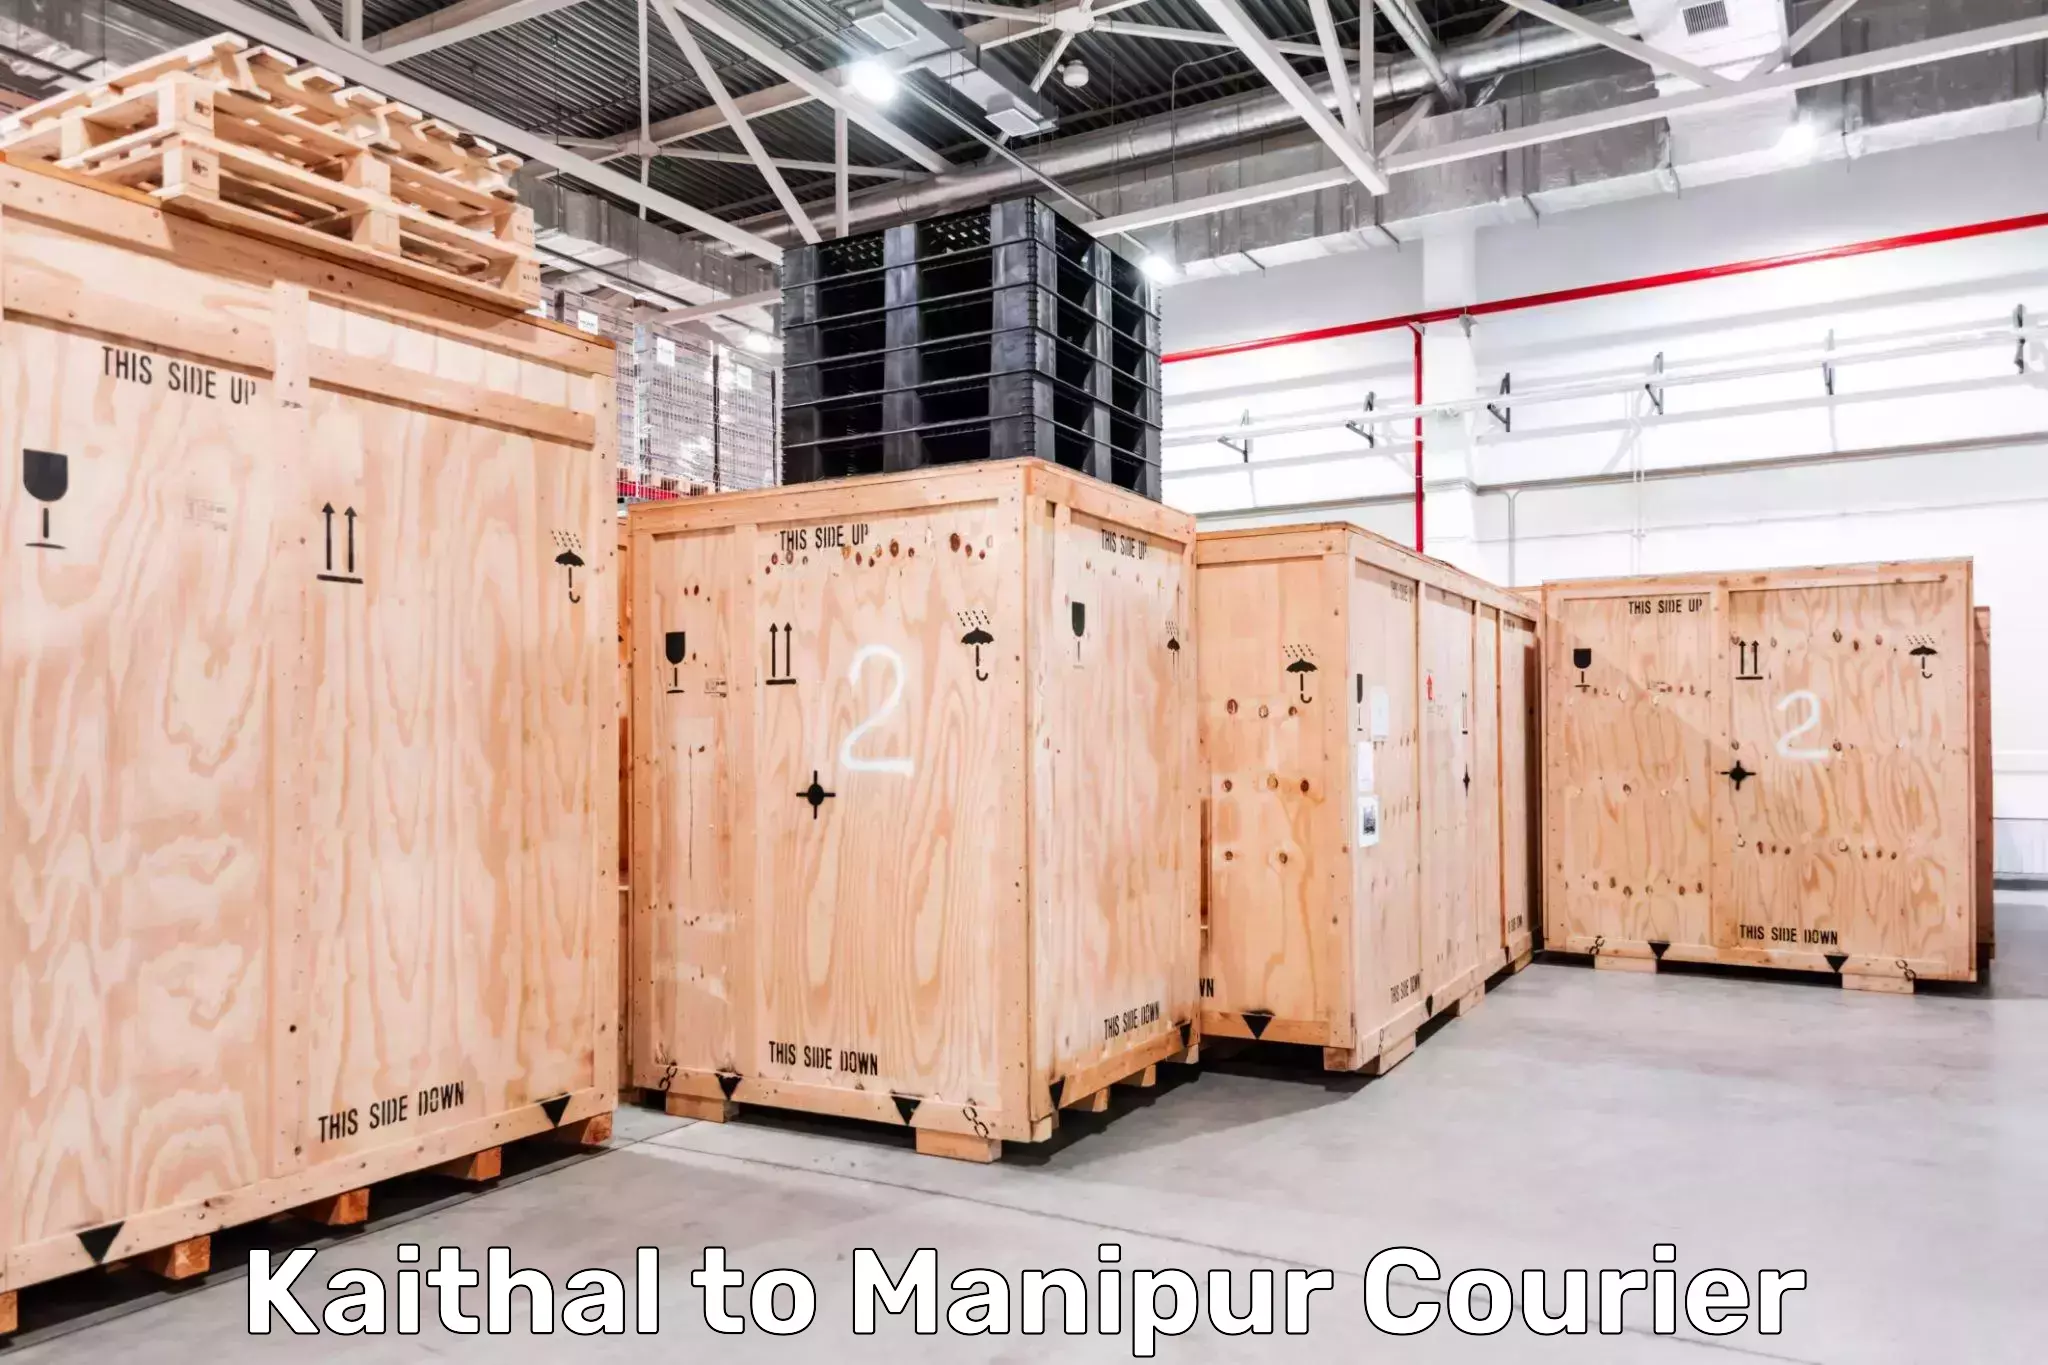 Global courier networks Kaithal to Imphal